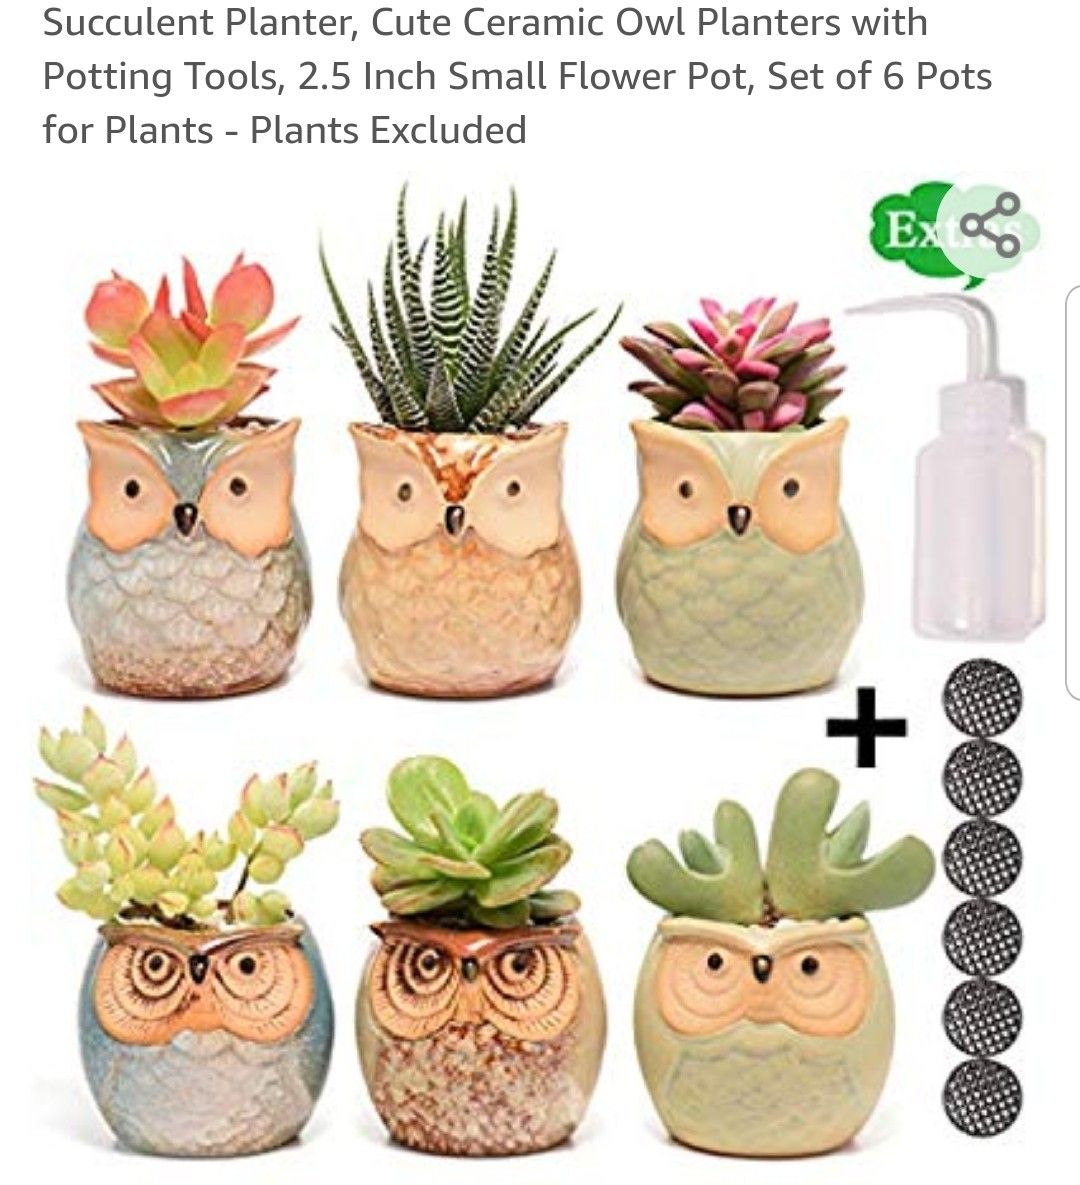 Cute Ceramic Owl Planters with Potting Tools